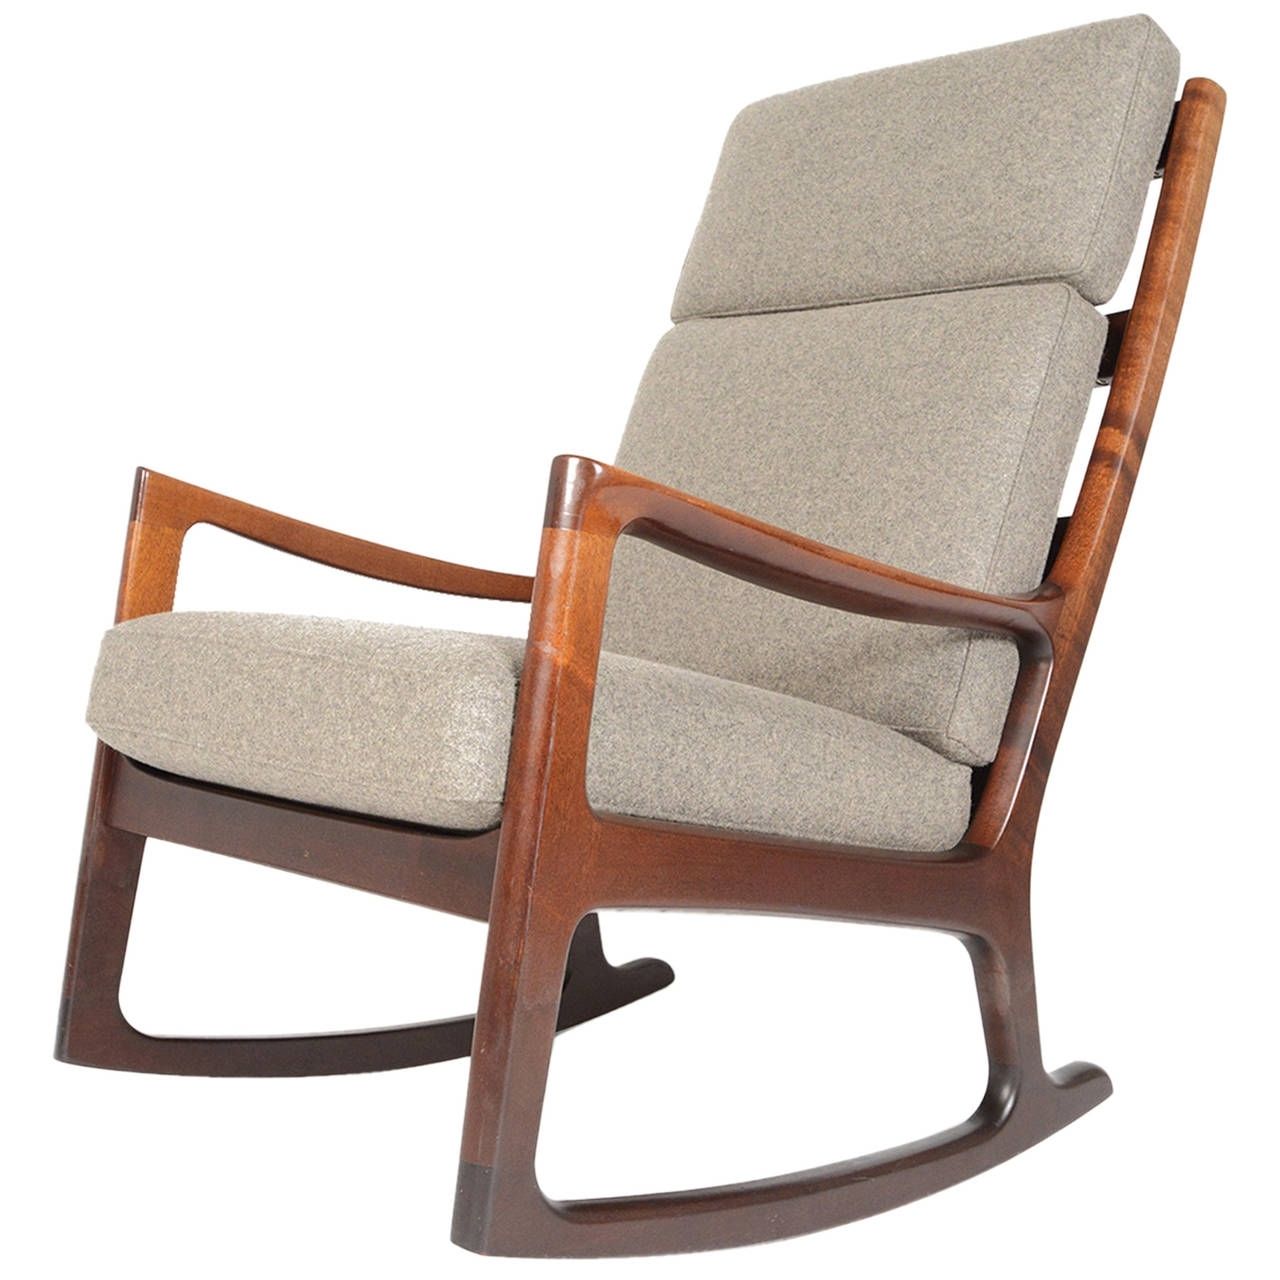 Best And Newest High Back Rocking Chairs With Regard To Ole Wanscher Mahogany Highback Rocking Chair At 1stdibs (View 1 of 15)